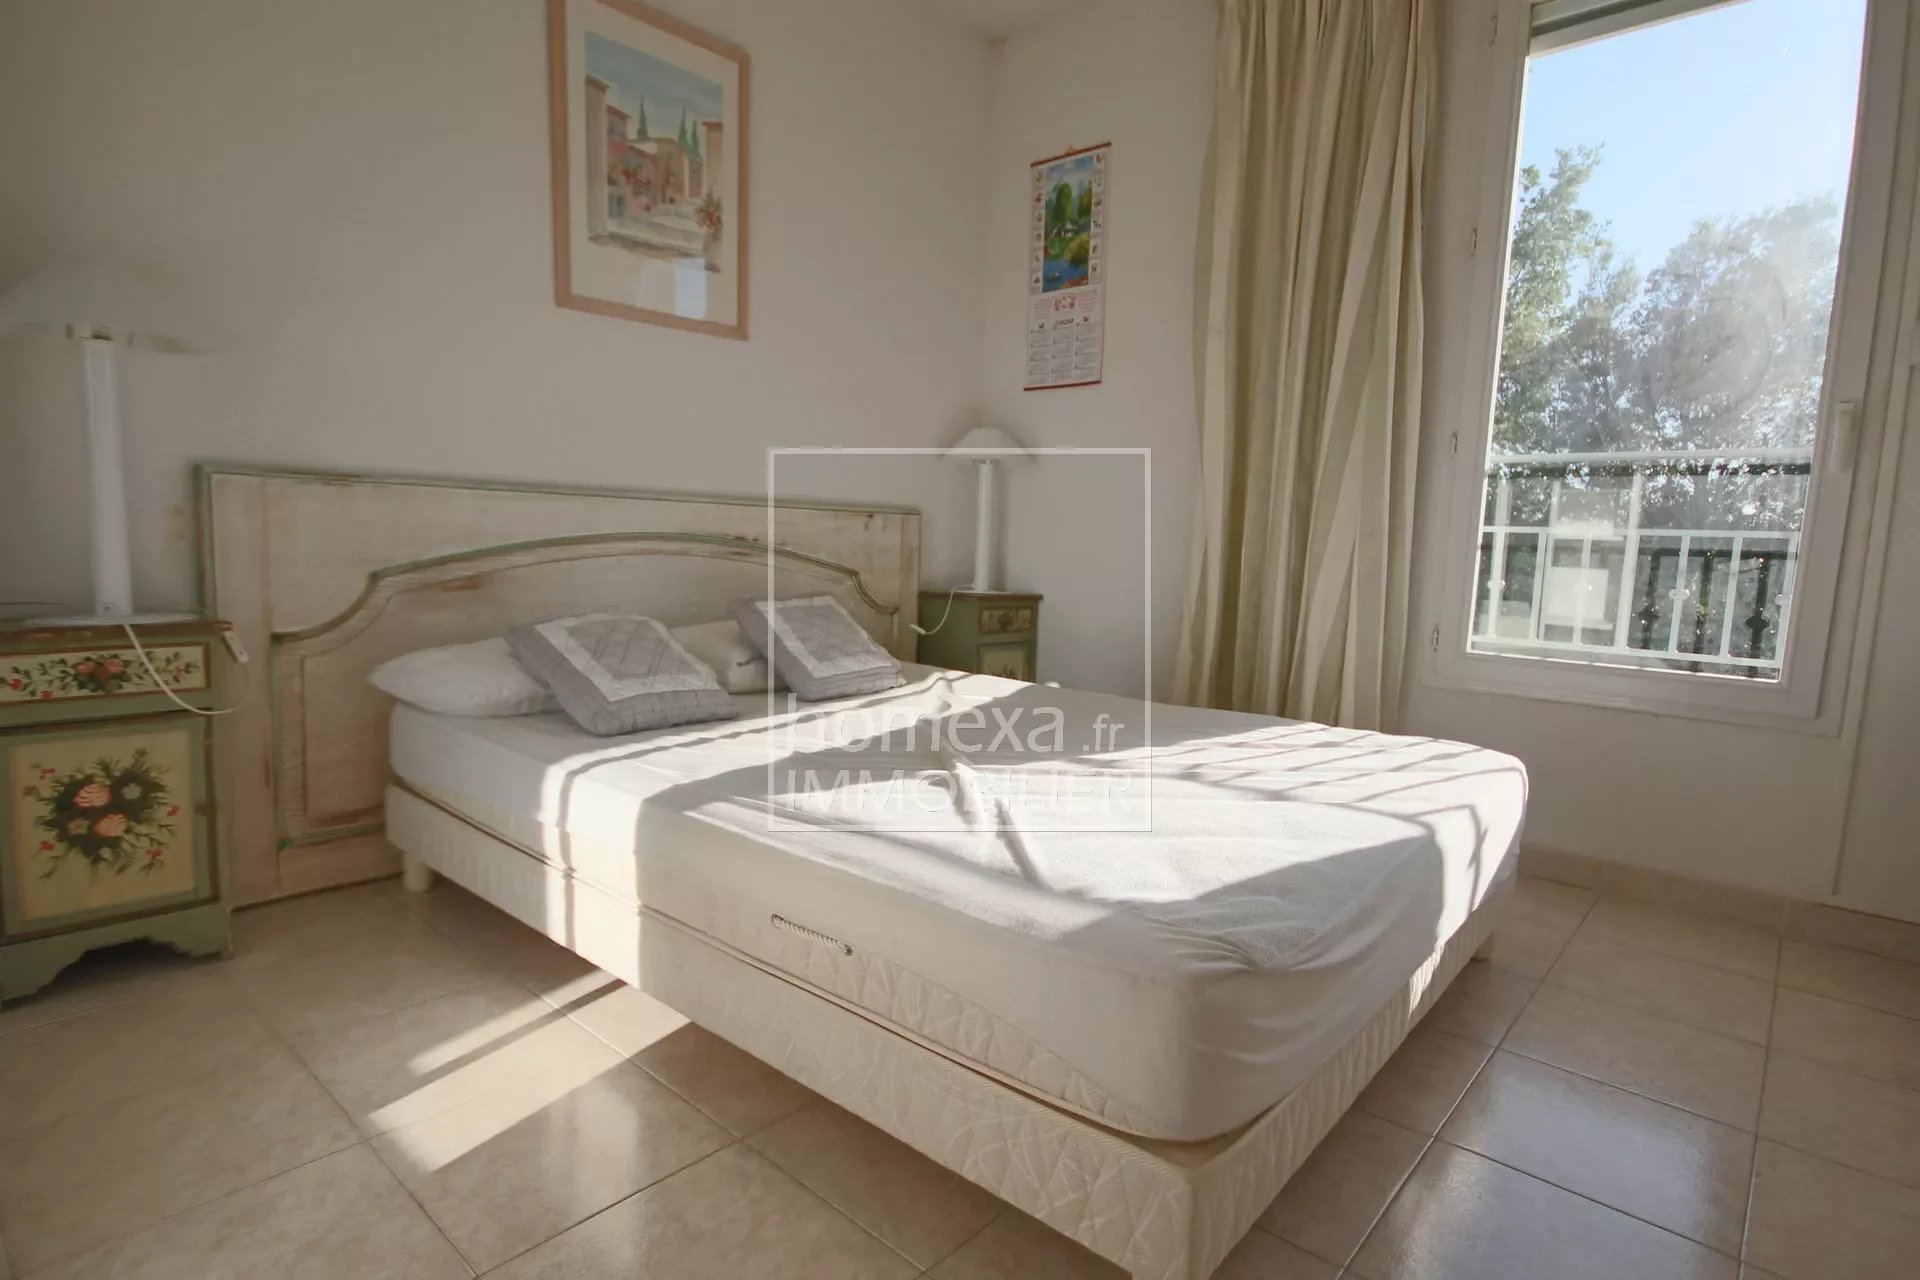 Apartment for sale in Biot Saint-Philippe : bedroom view